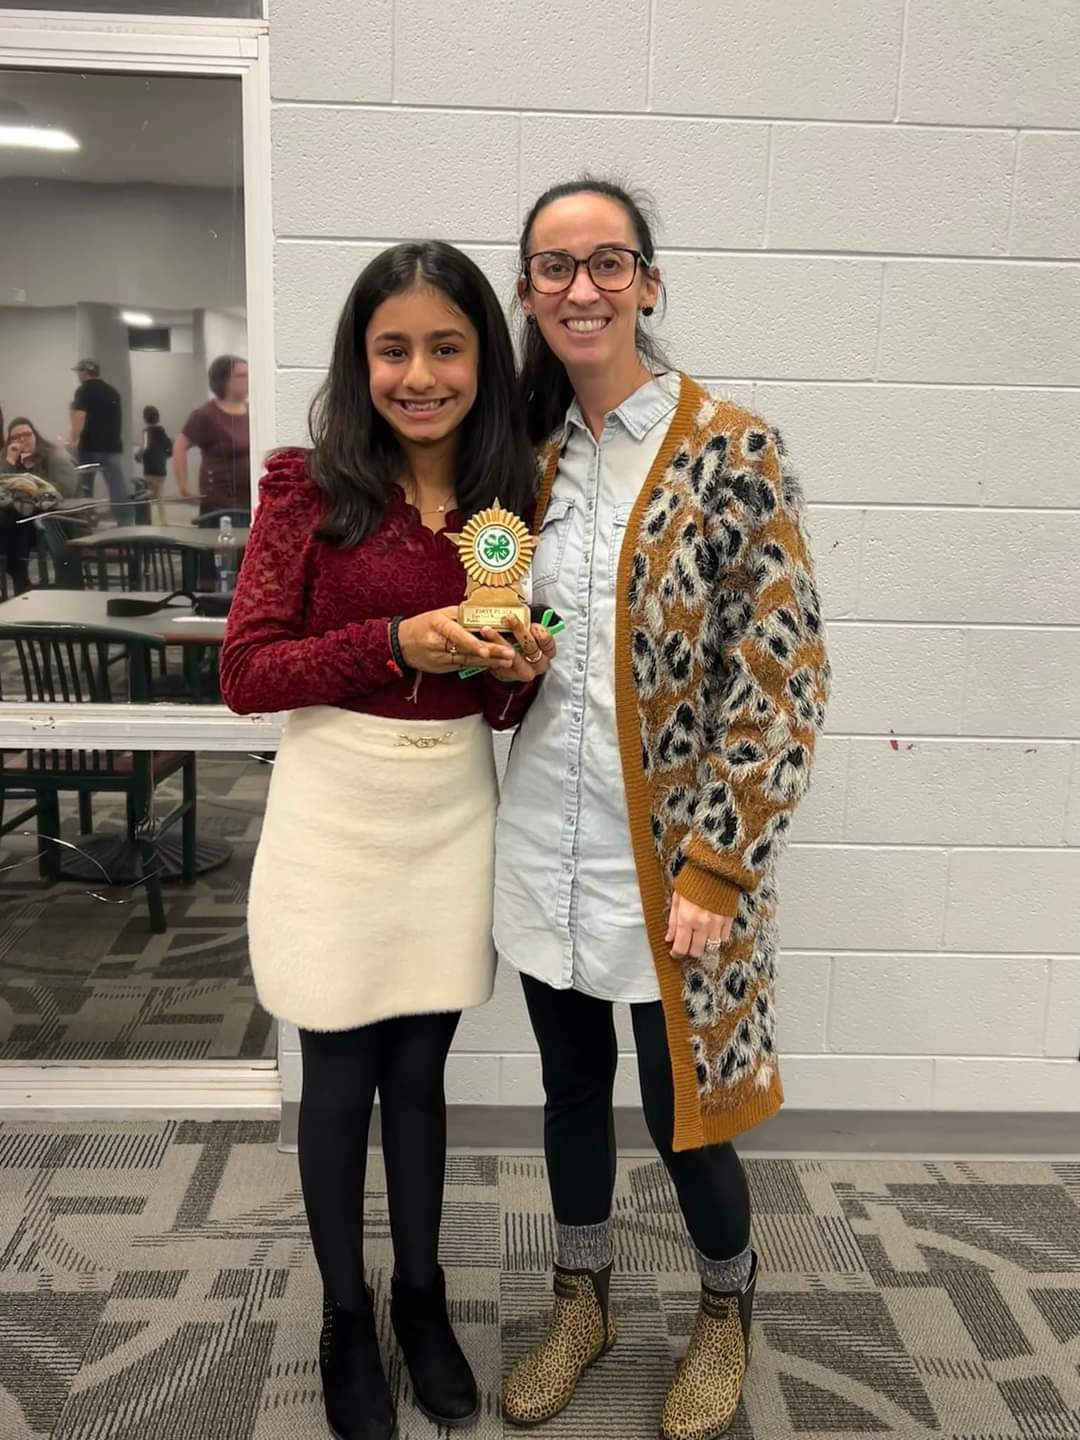 Hiya Patel, 5th grade student from Sewanee Elementary, won 1st place in the Regional 4-H Speech Competition that was held at Motlow State Community College. (Pictured with Hiya is Allison Dietz, Principal of Sewanee Elementary).